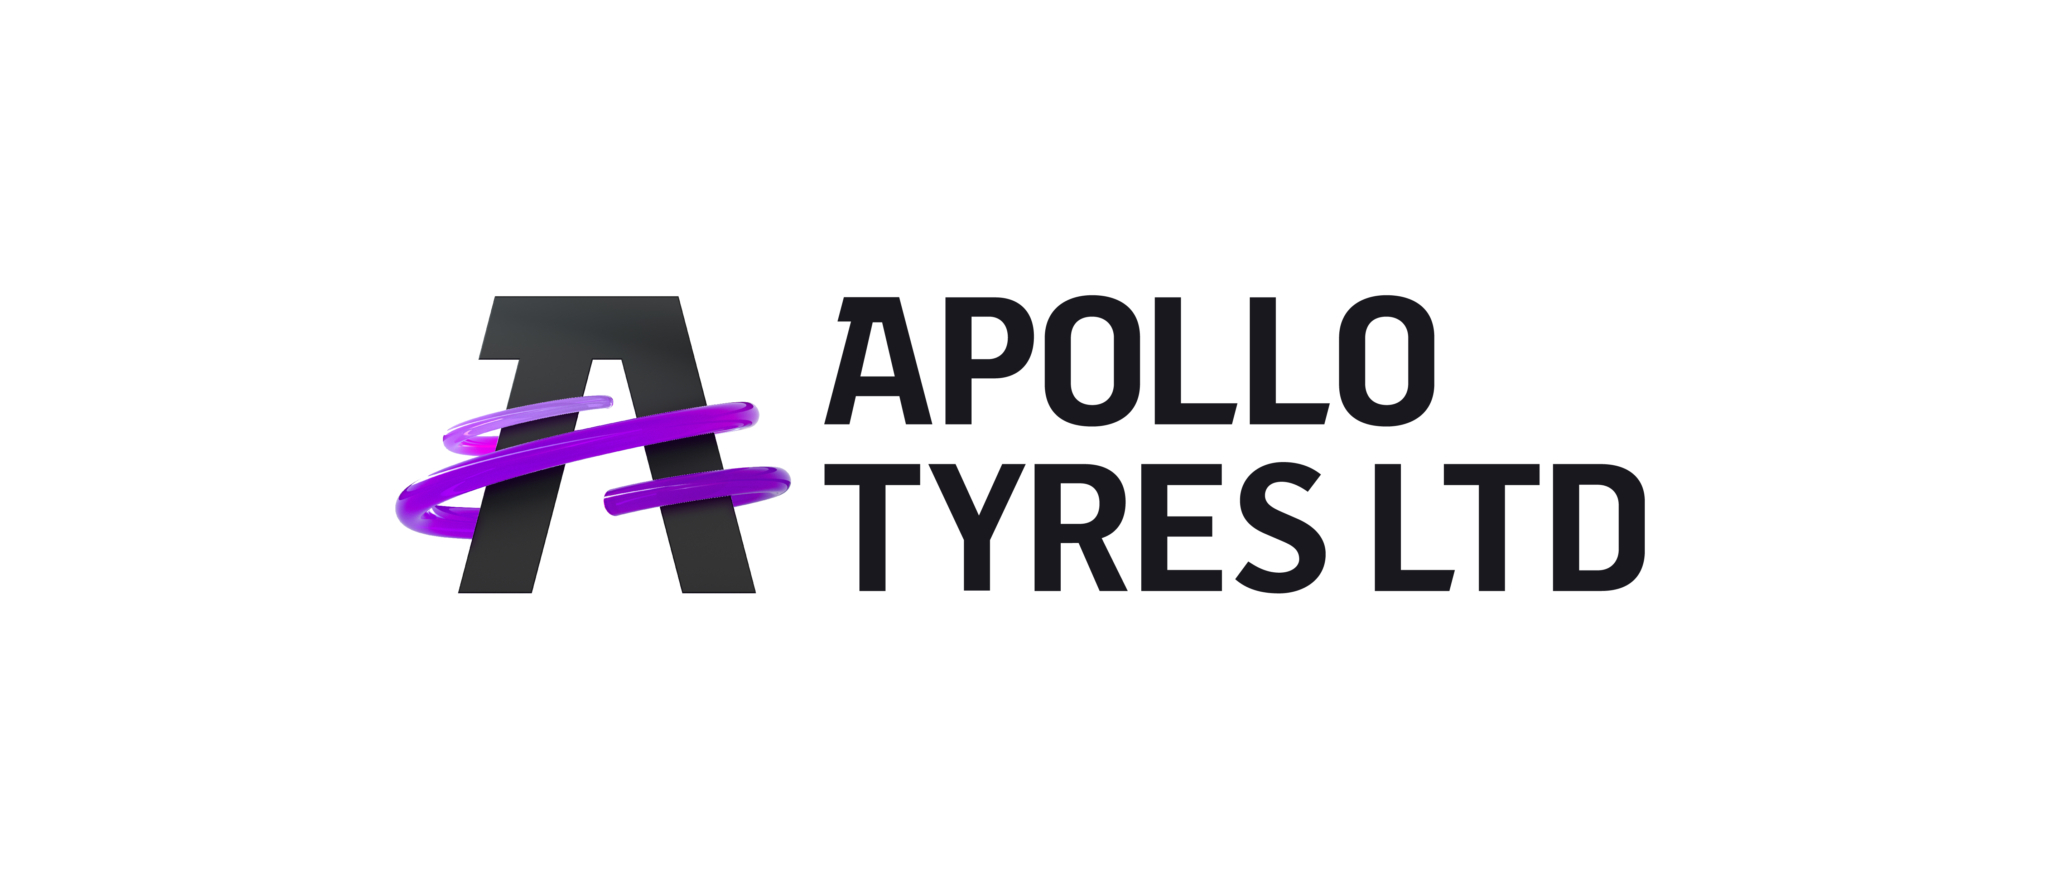 Apollo Tyres: New corporate identity reflects new vision and purpose